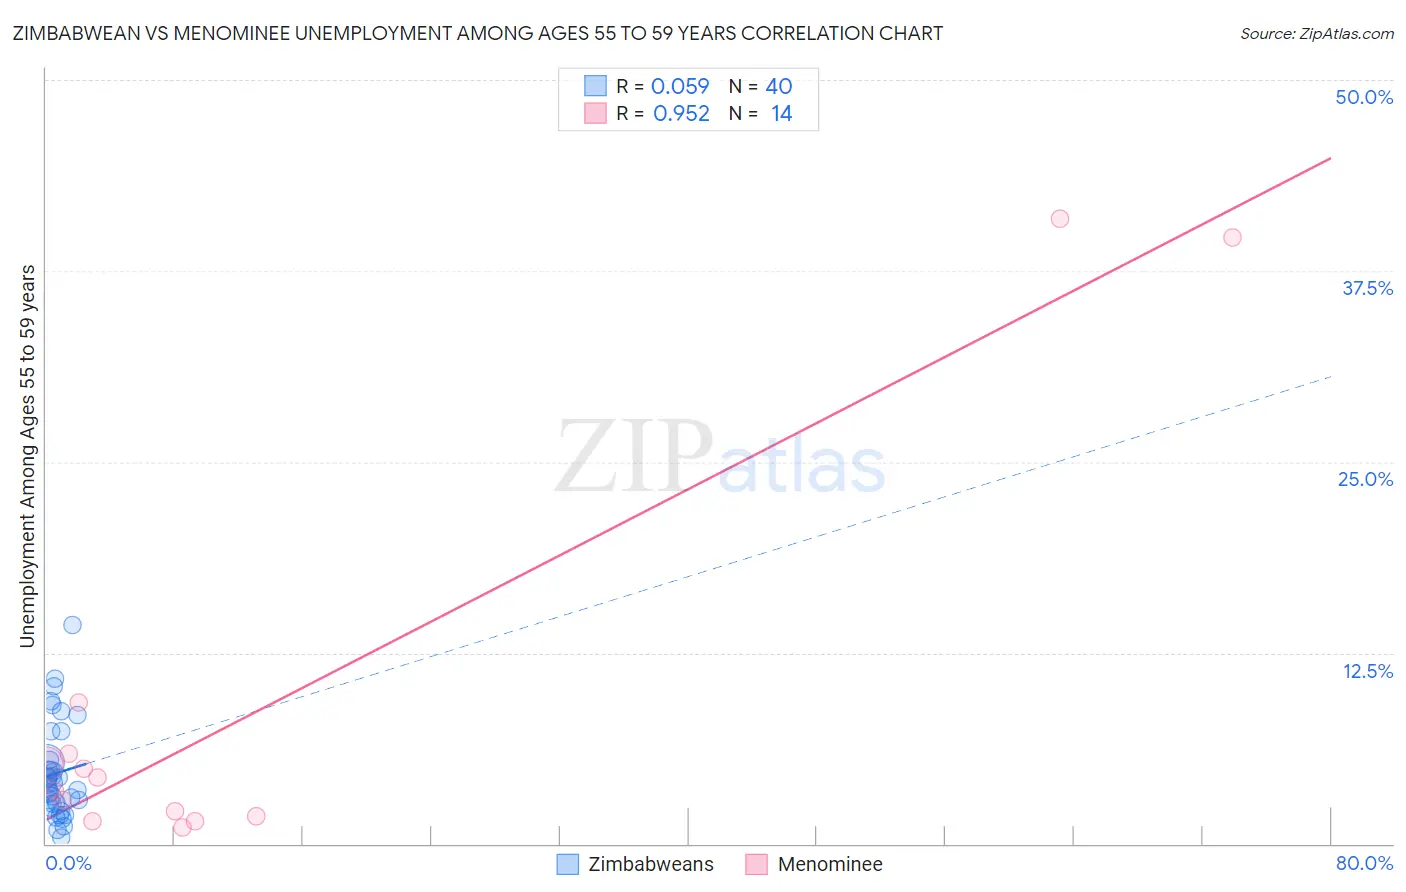 Zimbabwean vs Menominee Unemployment Among Ages 55 to 59 years